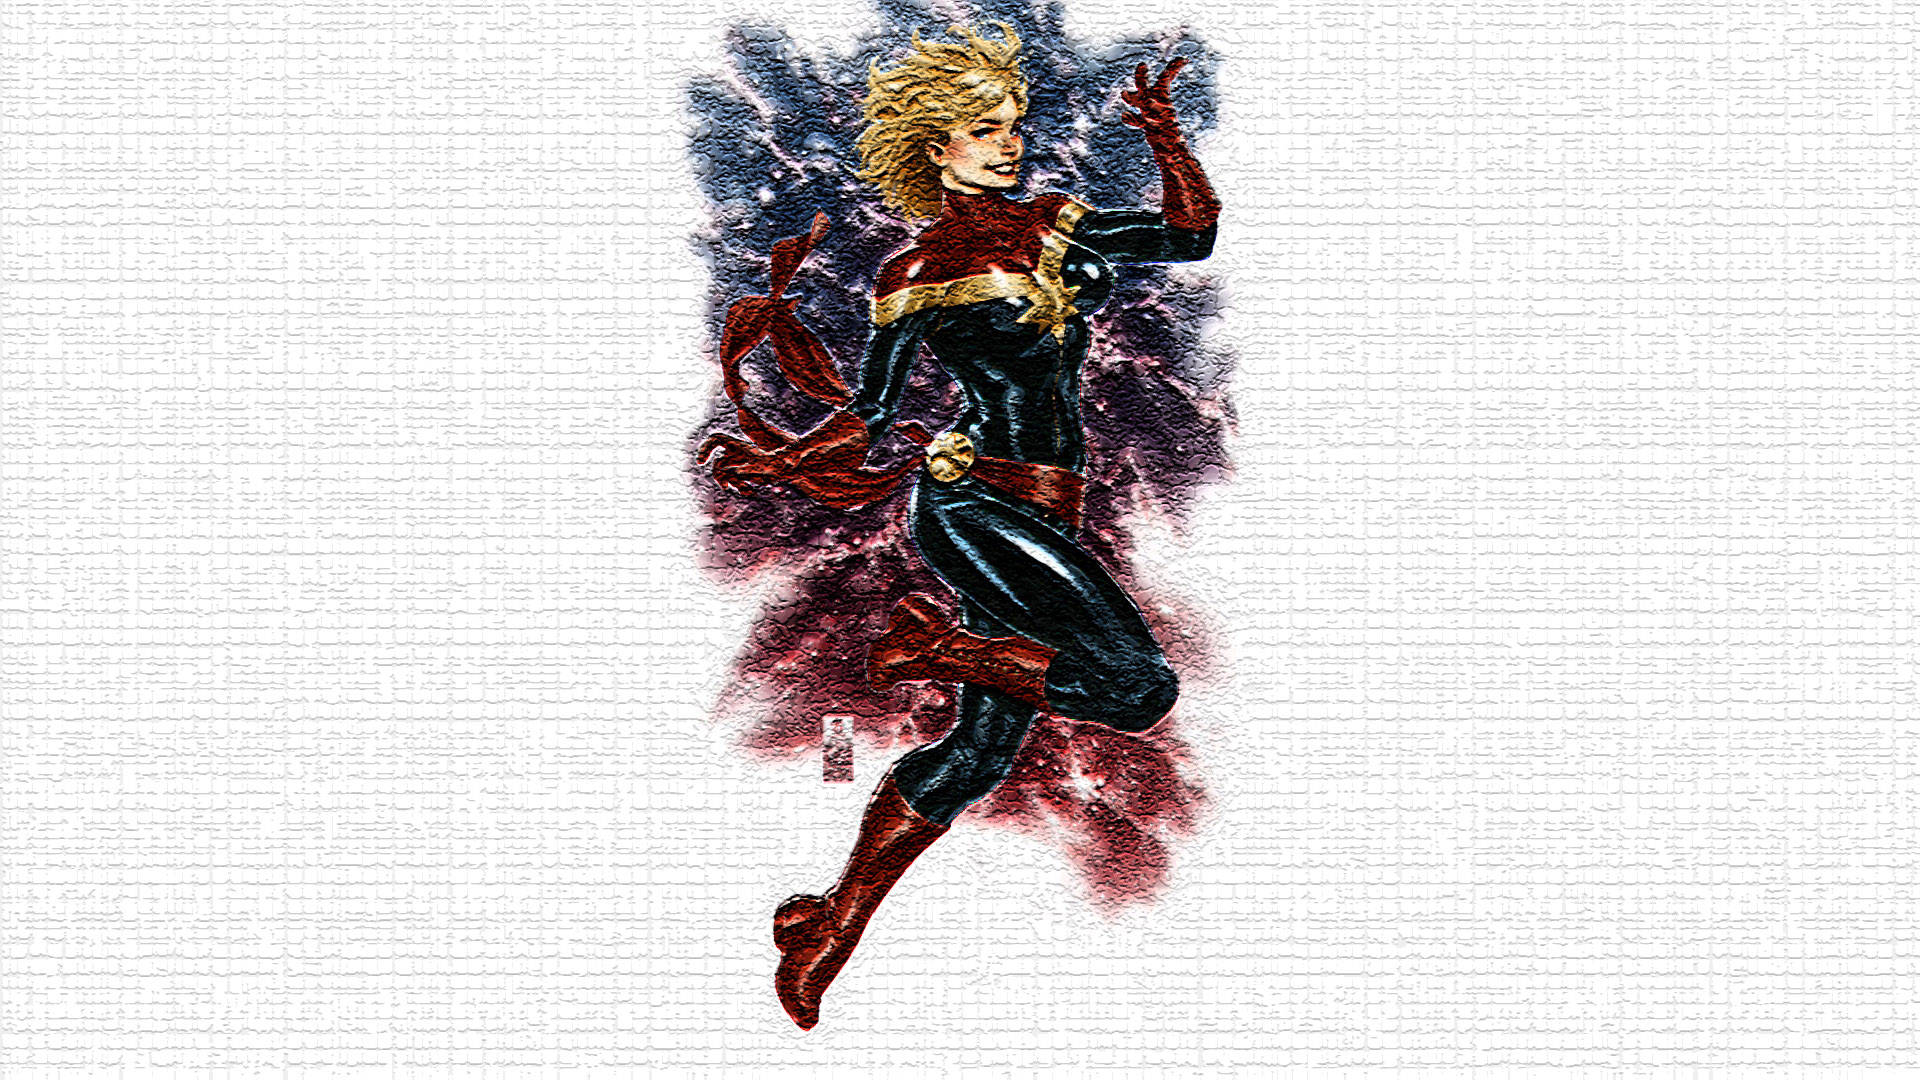 Captain Marvel taking charge at her computer Wallpaper